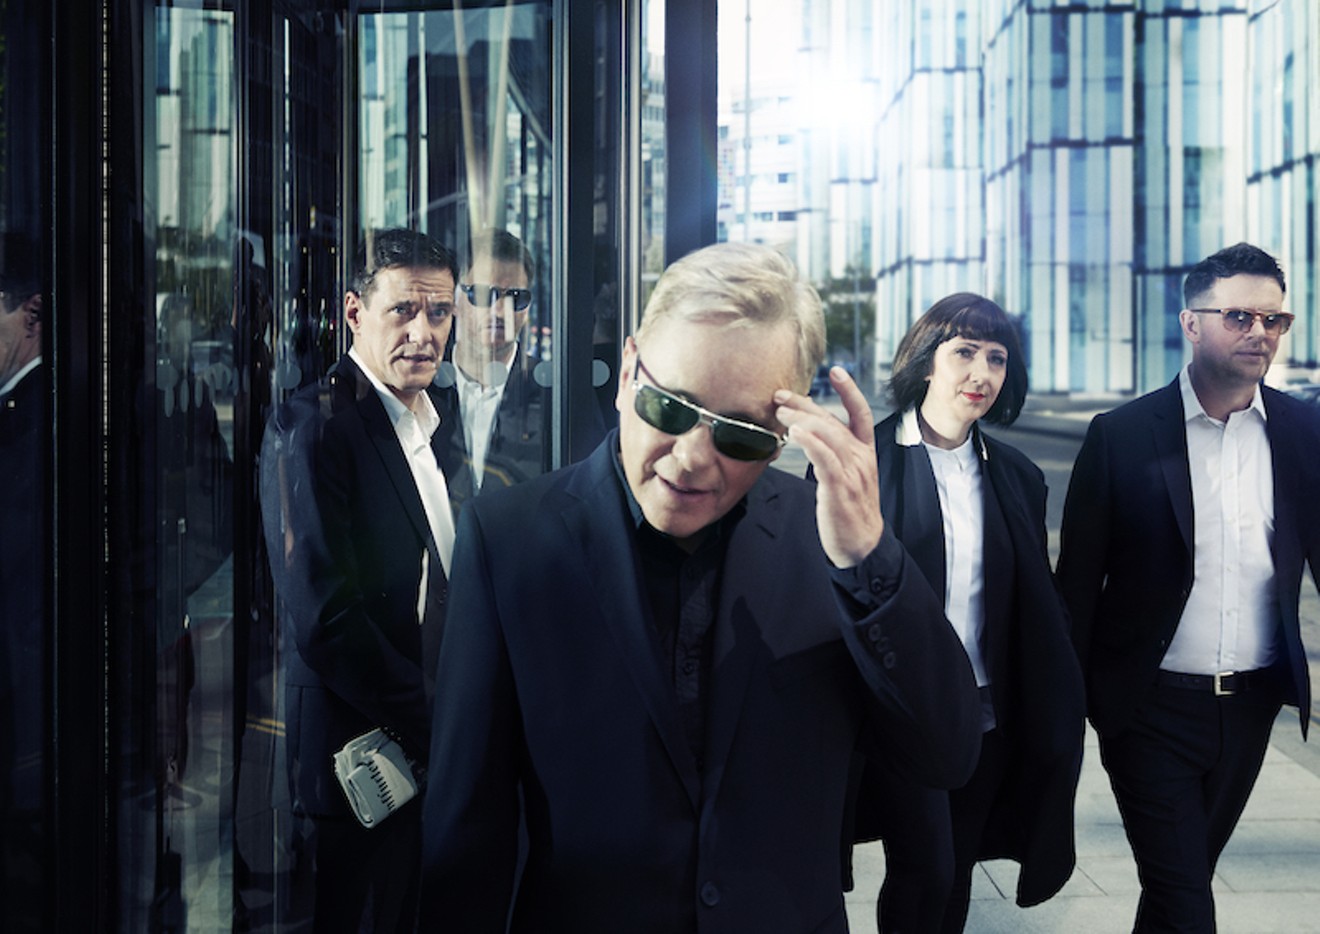 New Order is set to play a sold-out show at the Fillmore Miami Beach Saturday, January 12.